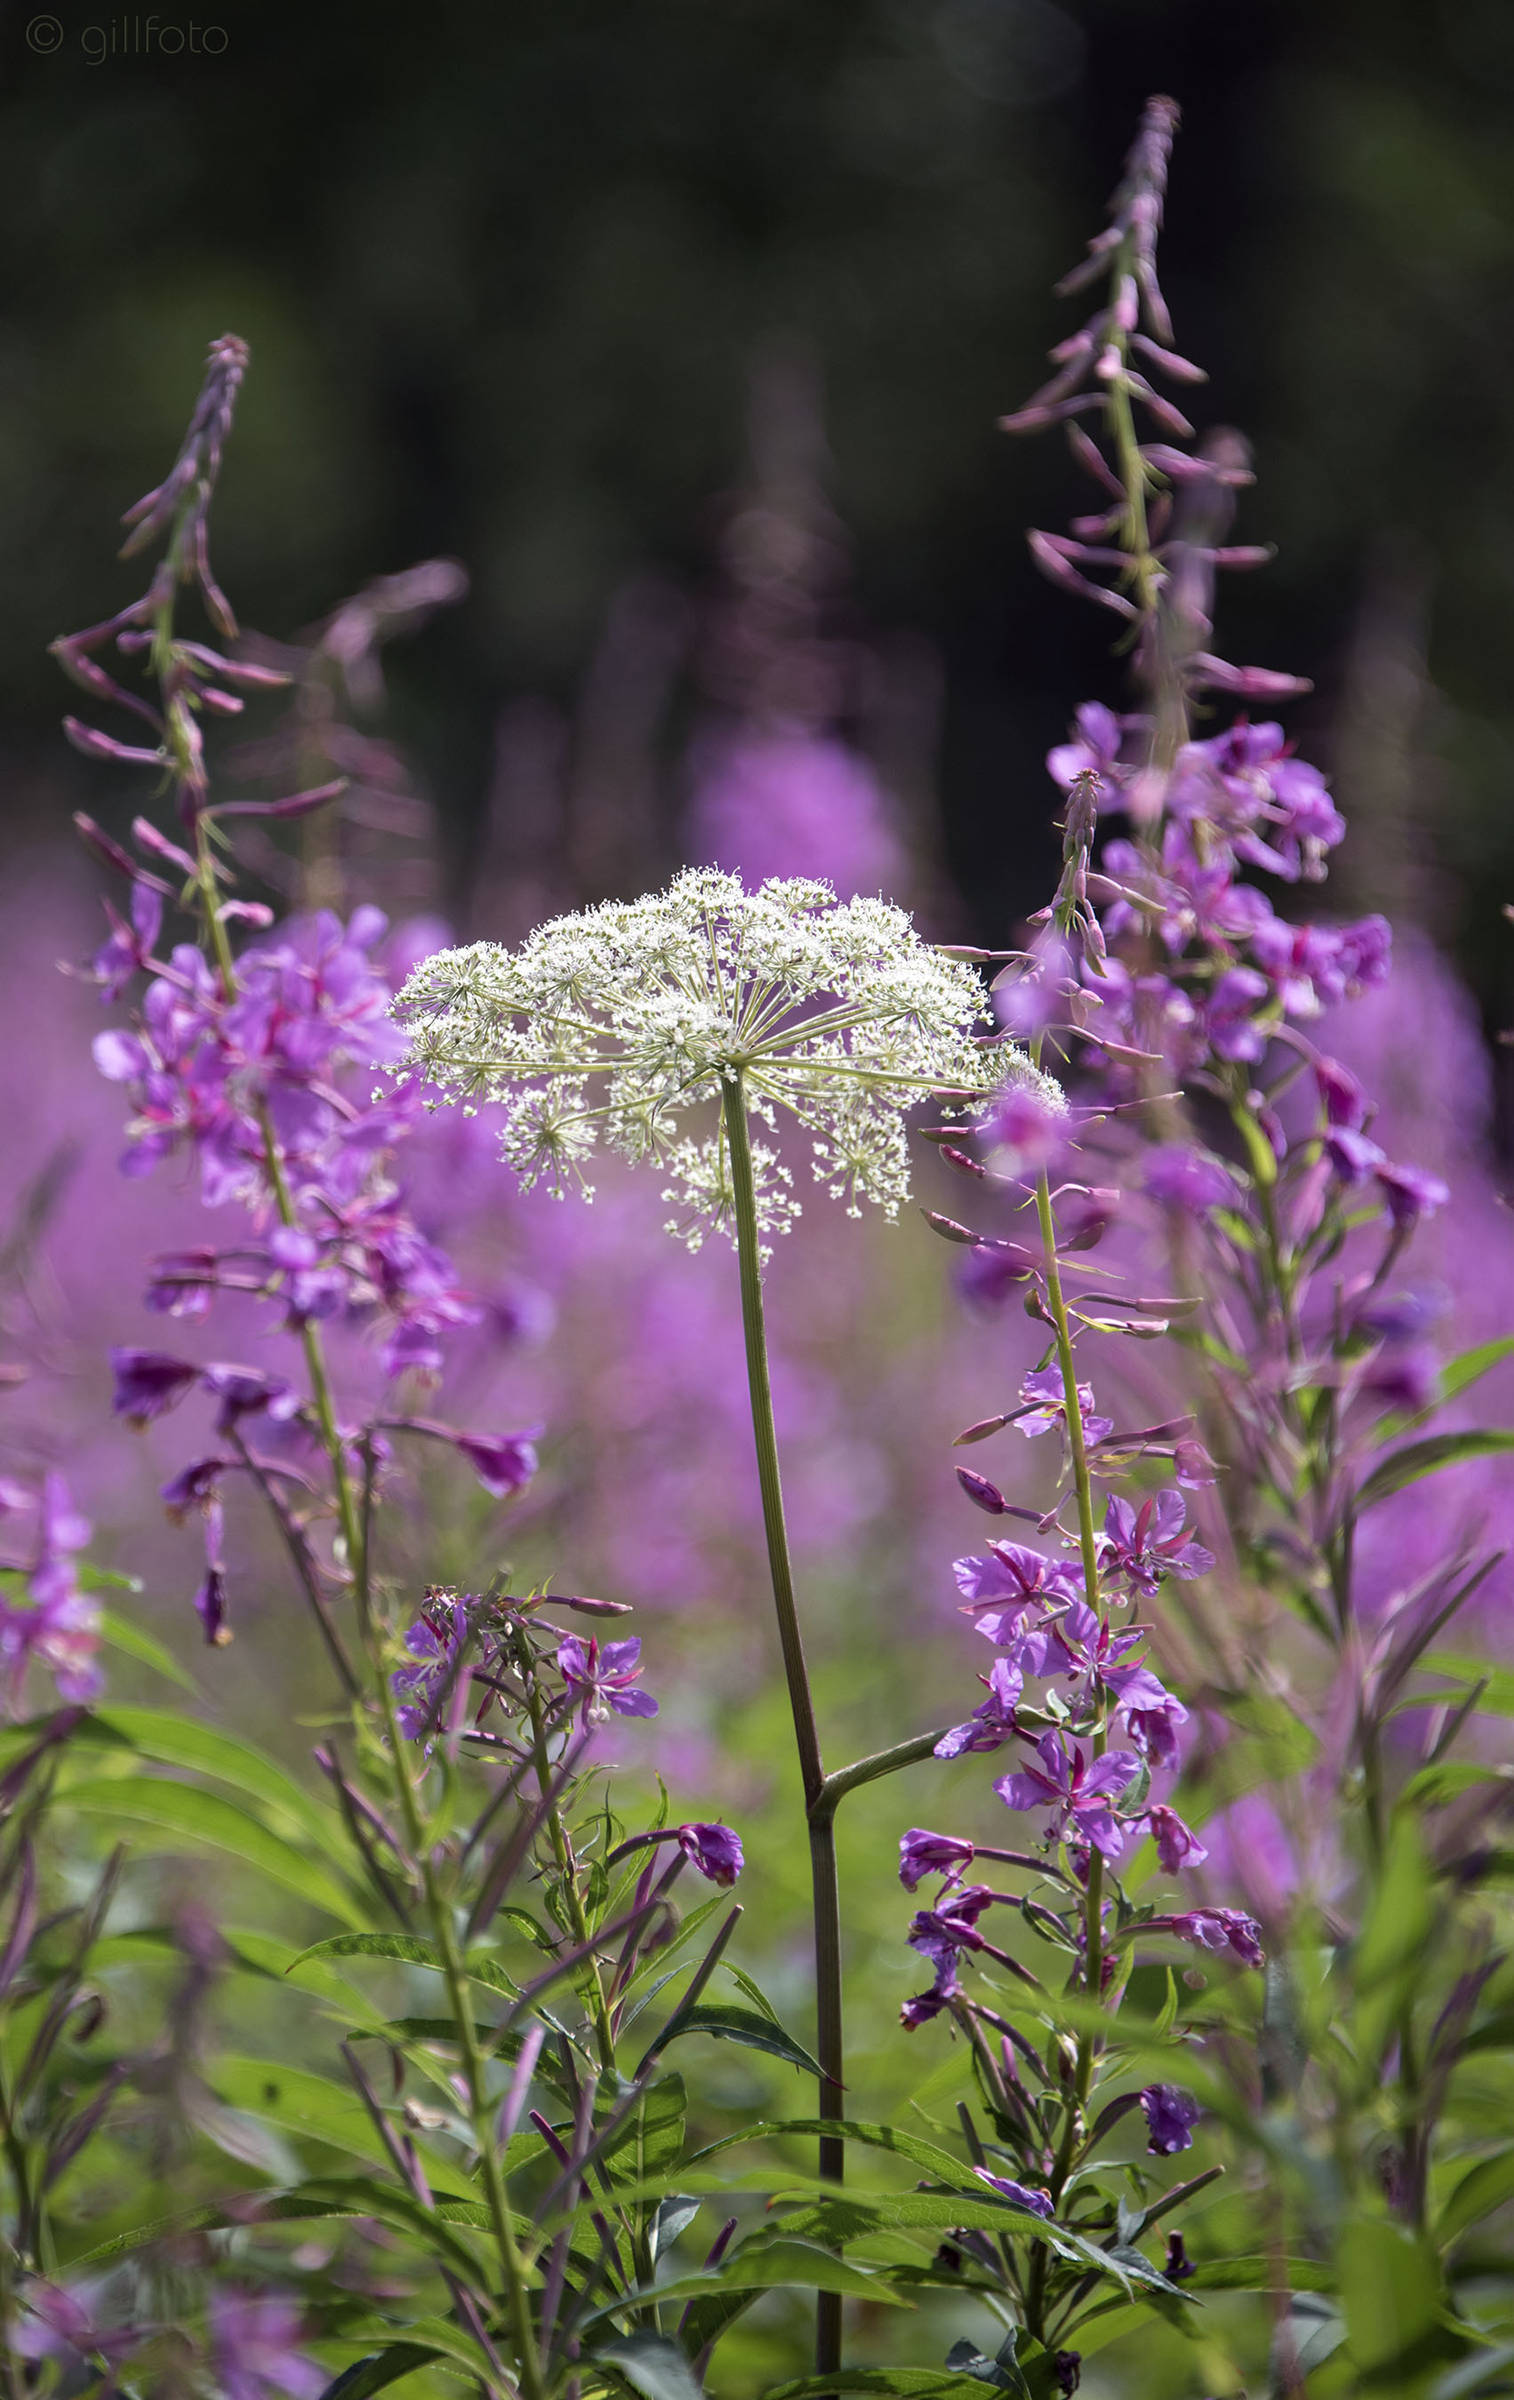 Fireweed surrounds a solo parsley plant in Cowee Meadow in Point Bridget State Park on Sunday, July 21, 2019. (Courtesy Photo | Kenneth Gill)